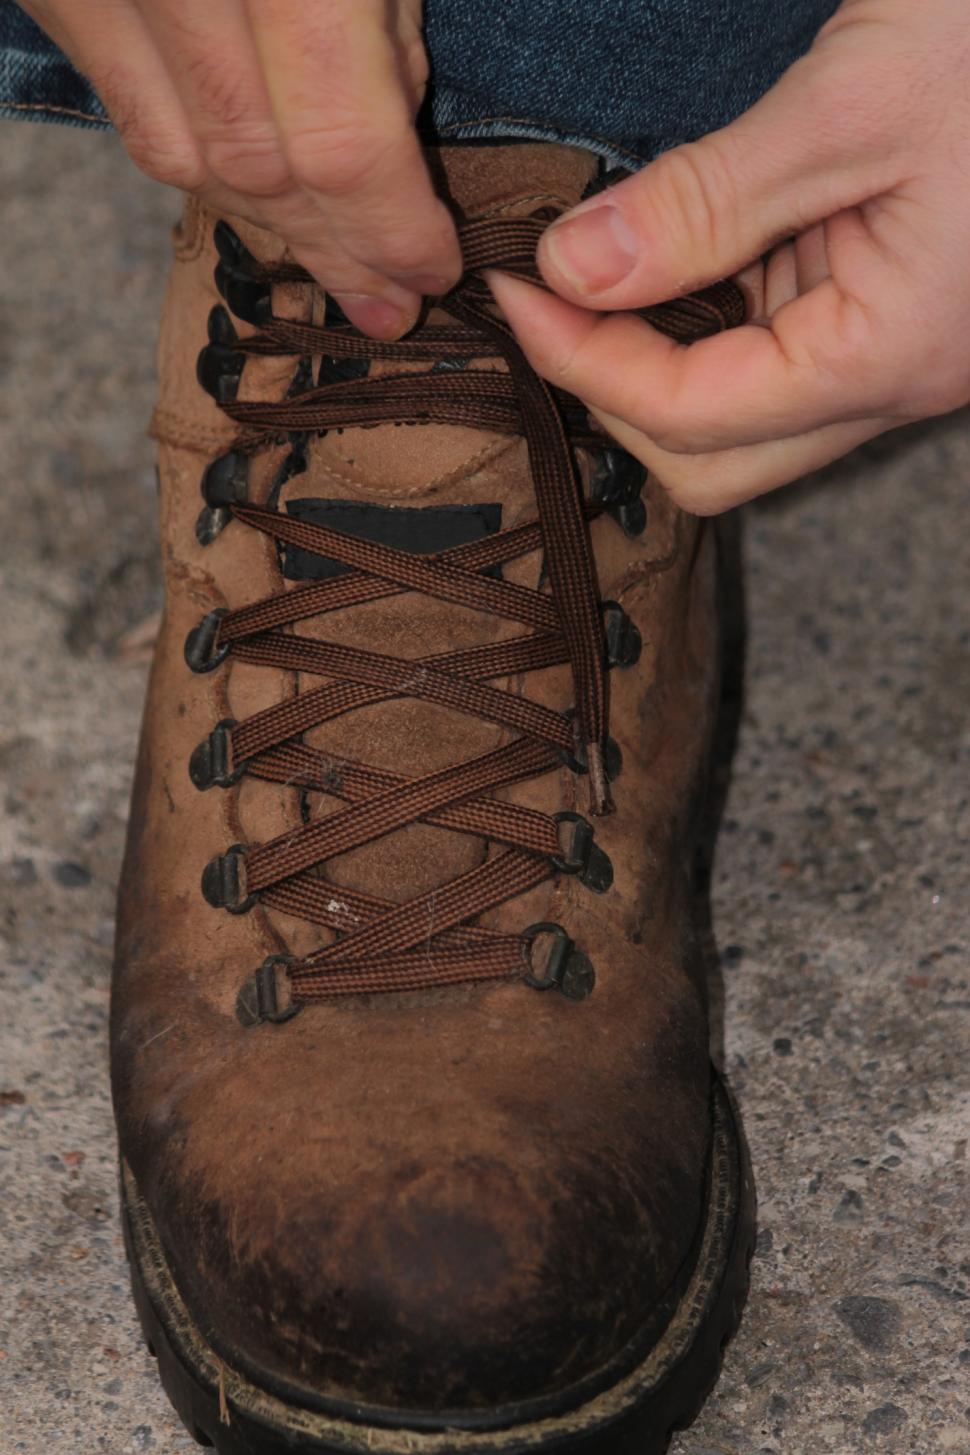 Free Image of Tying work boots 